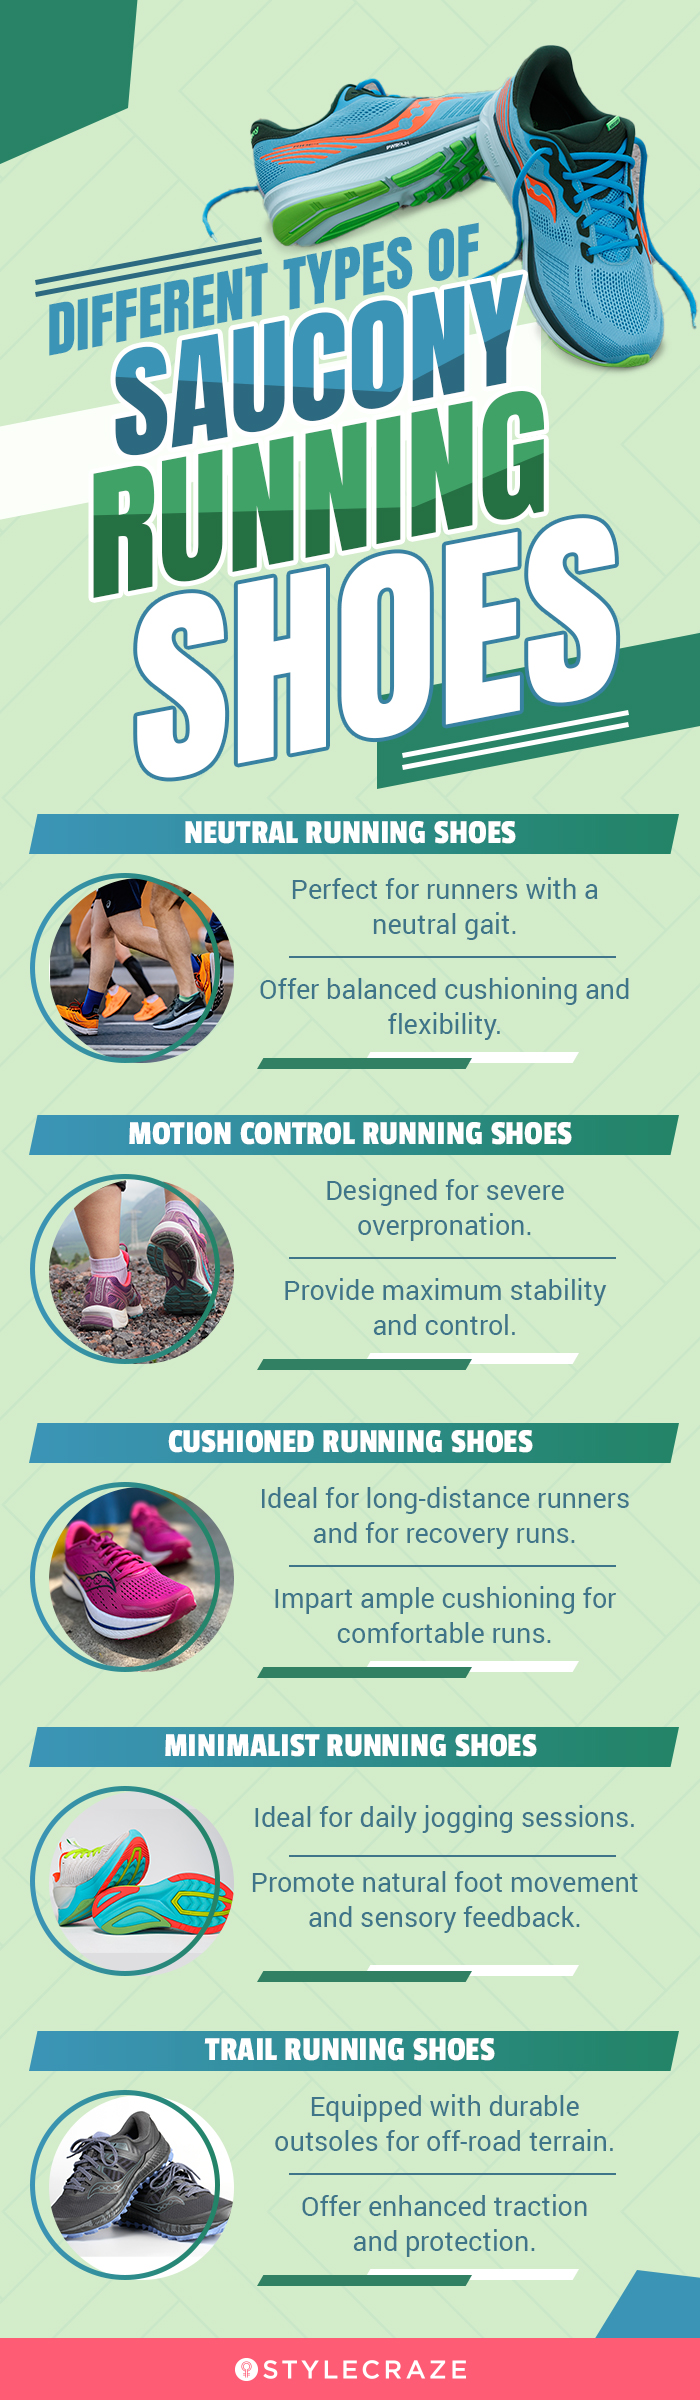 Different Types Of Saucony Running Shoes (infographic)